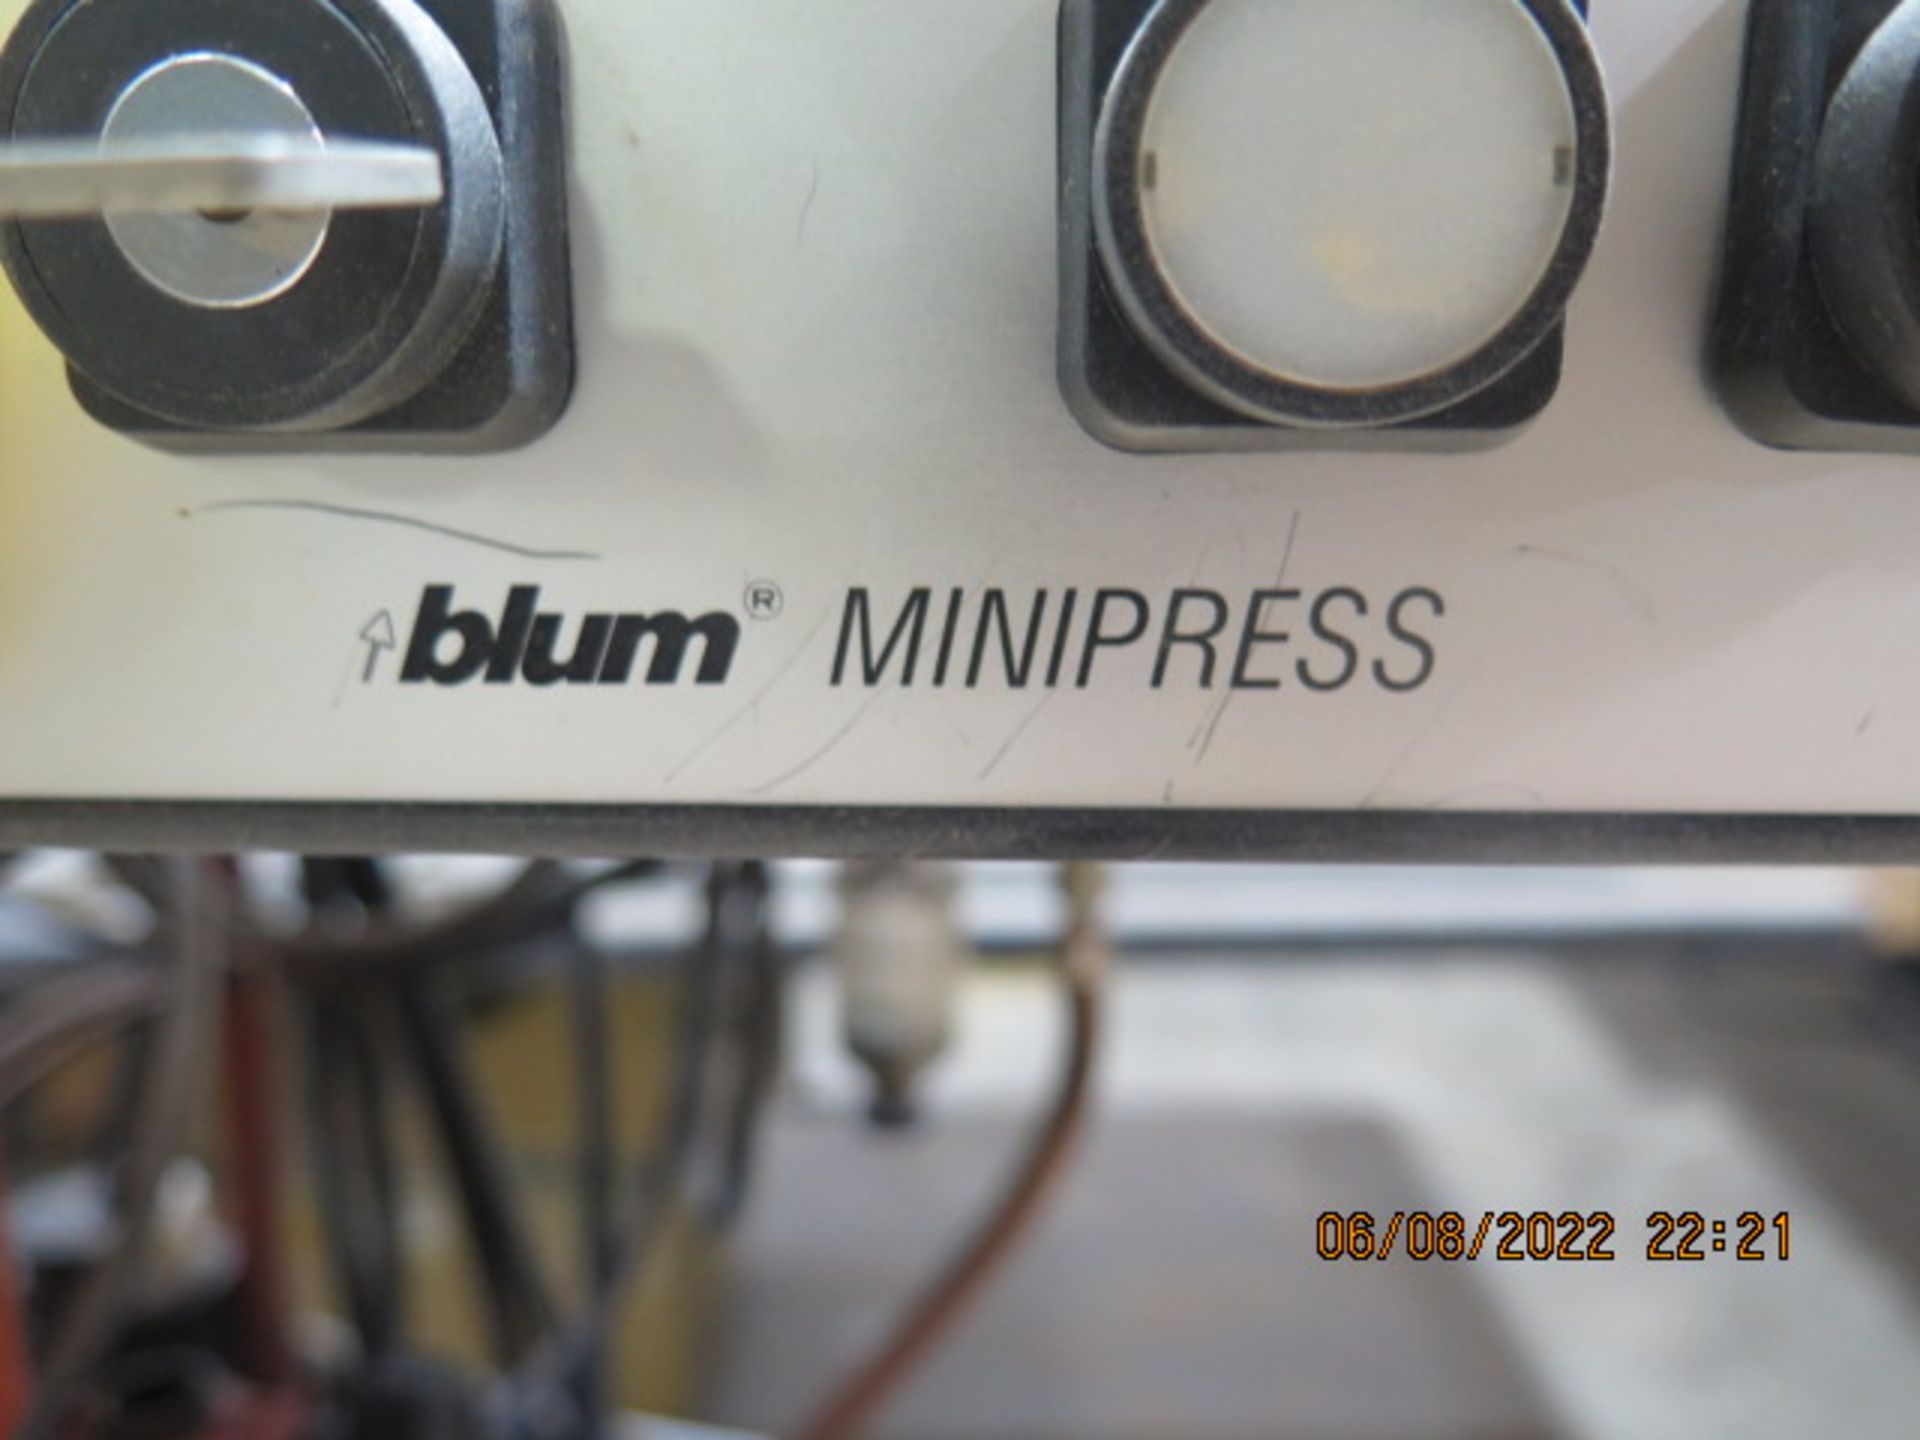 Blum mdl. M51N1004 “Mini Press” Hinge Router w/ Table (SOLD AS-IS - NO WARRANTY) - Image 6 of 6